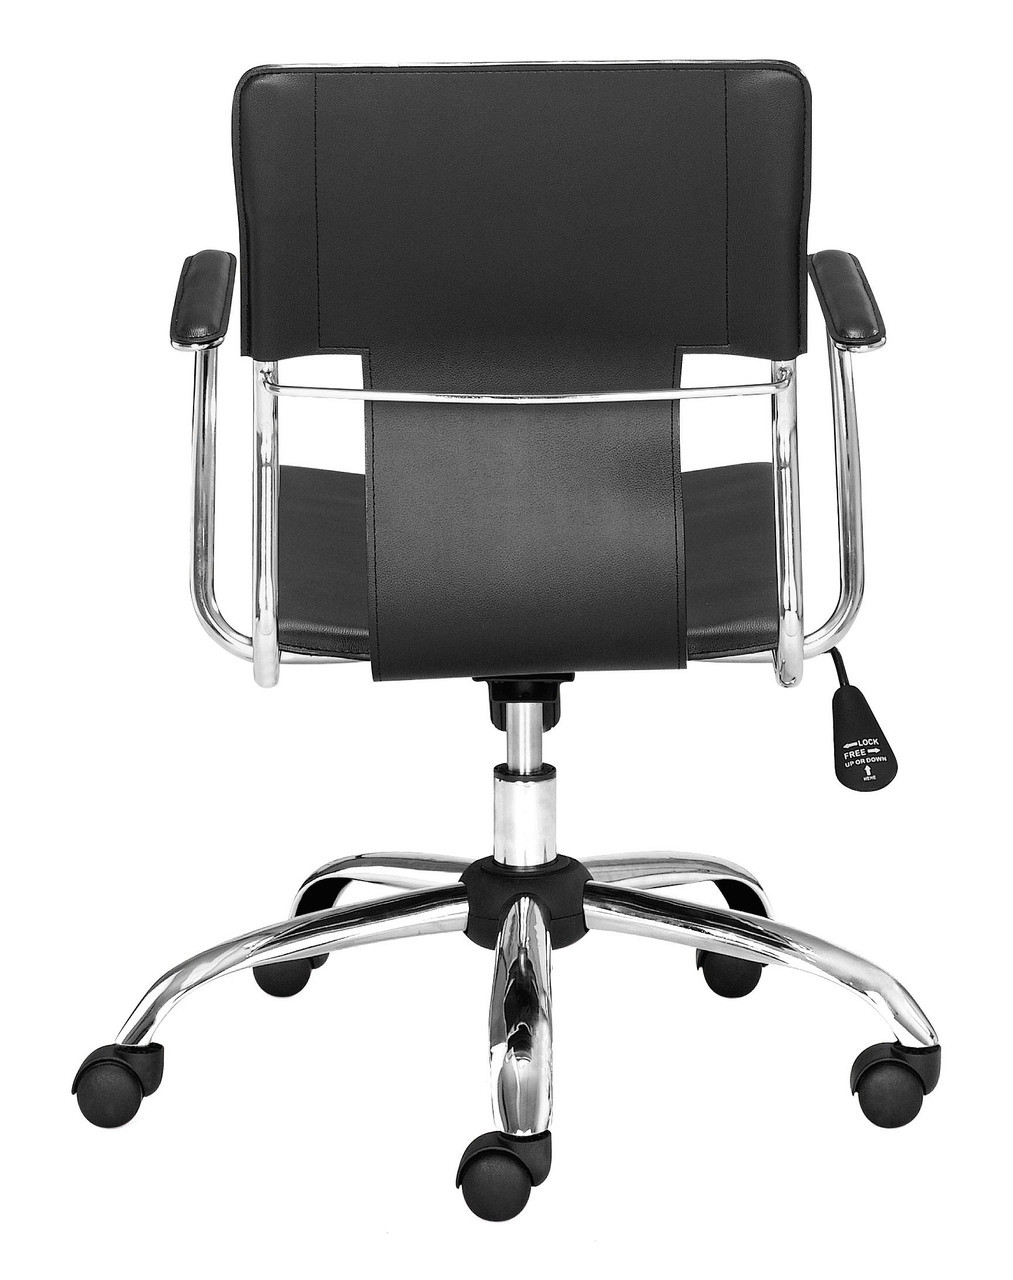 Trafico Office Chair Black, ZO-205181